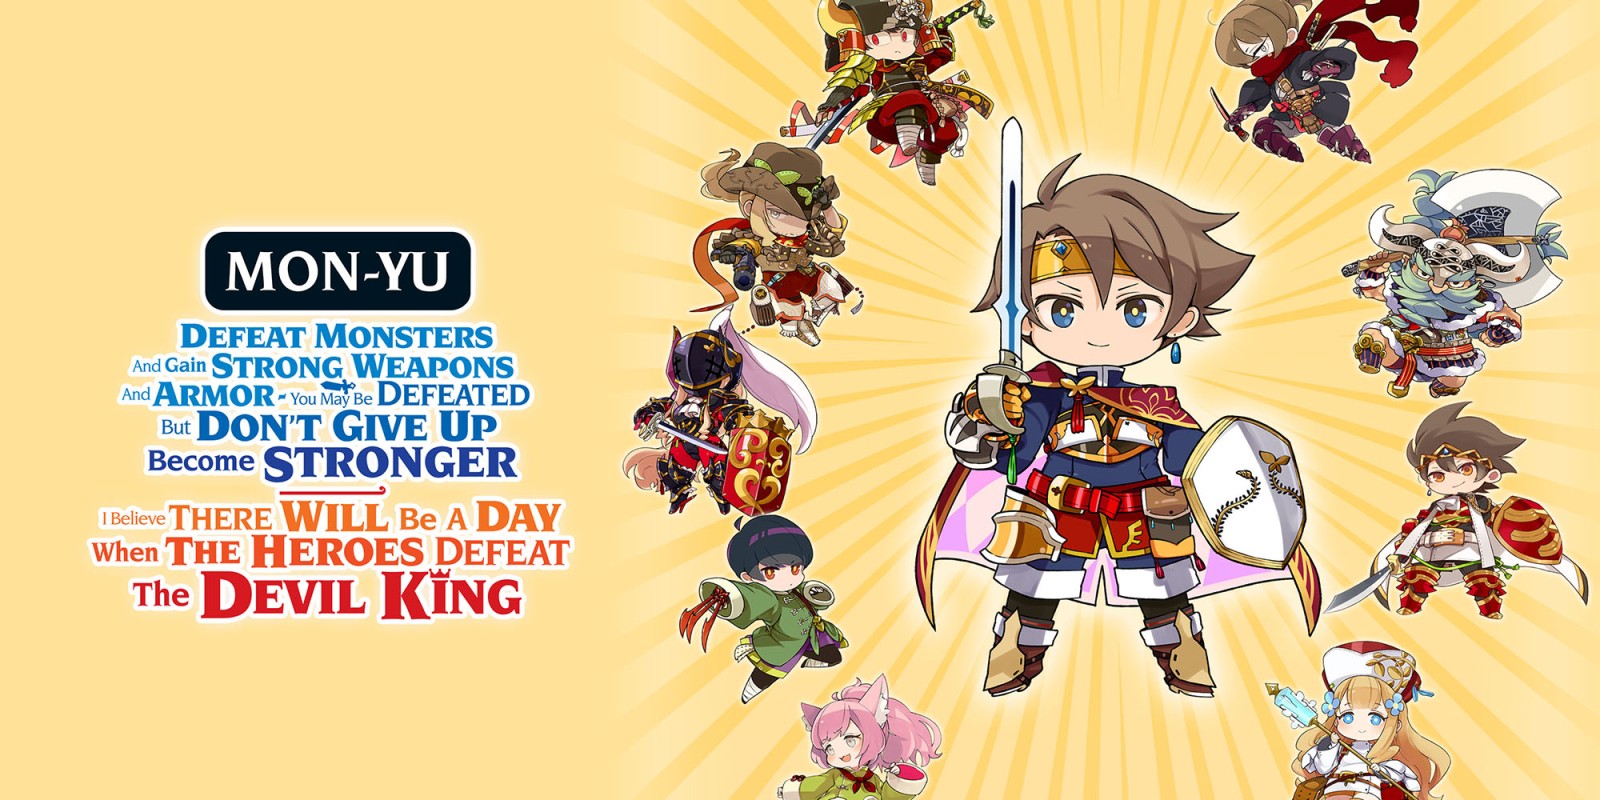 MON-YU: DEFEAT MONSTERS AND GAIN STRONG WEAPONS AND ARMOR. YOU MAY BE DEFEATED, BUT DON’T GIVE UP. BECOME STRONGER. I BELIEVE THERE WILL BE A DAY WHEN THE HEROES DEFEAT THE DEVIL KING